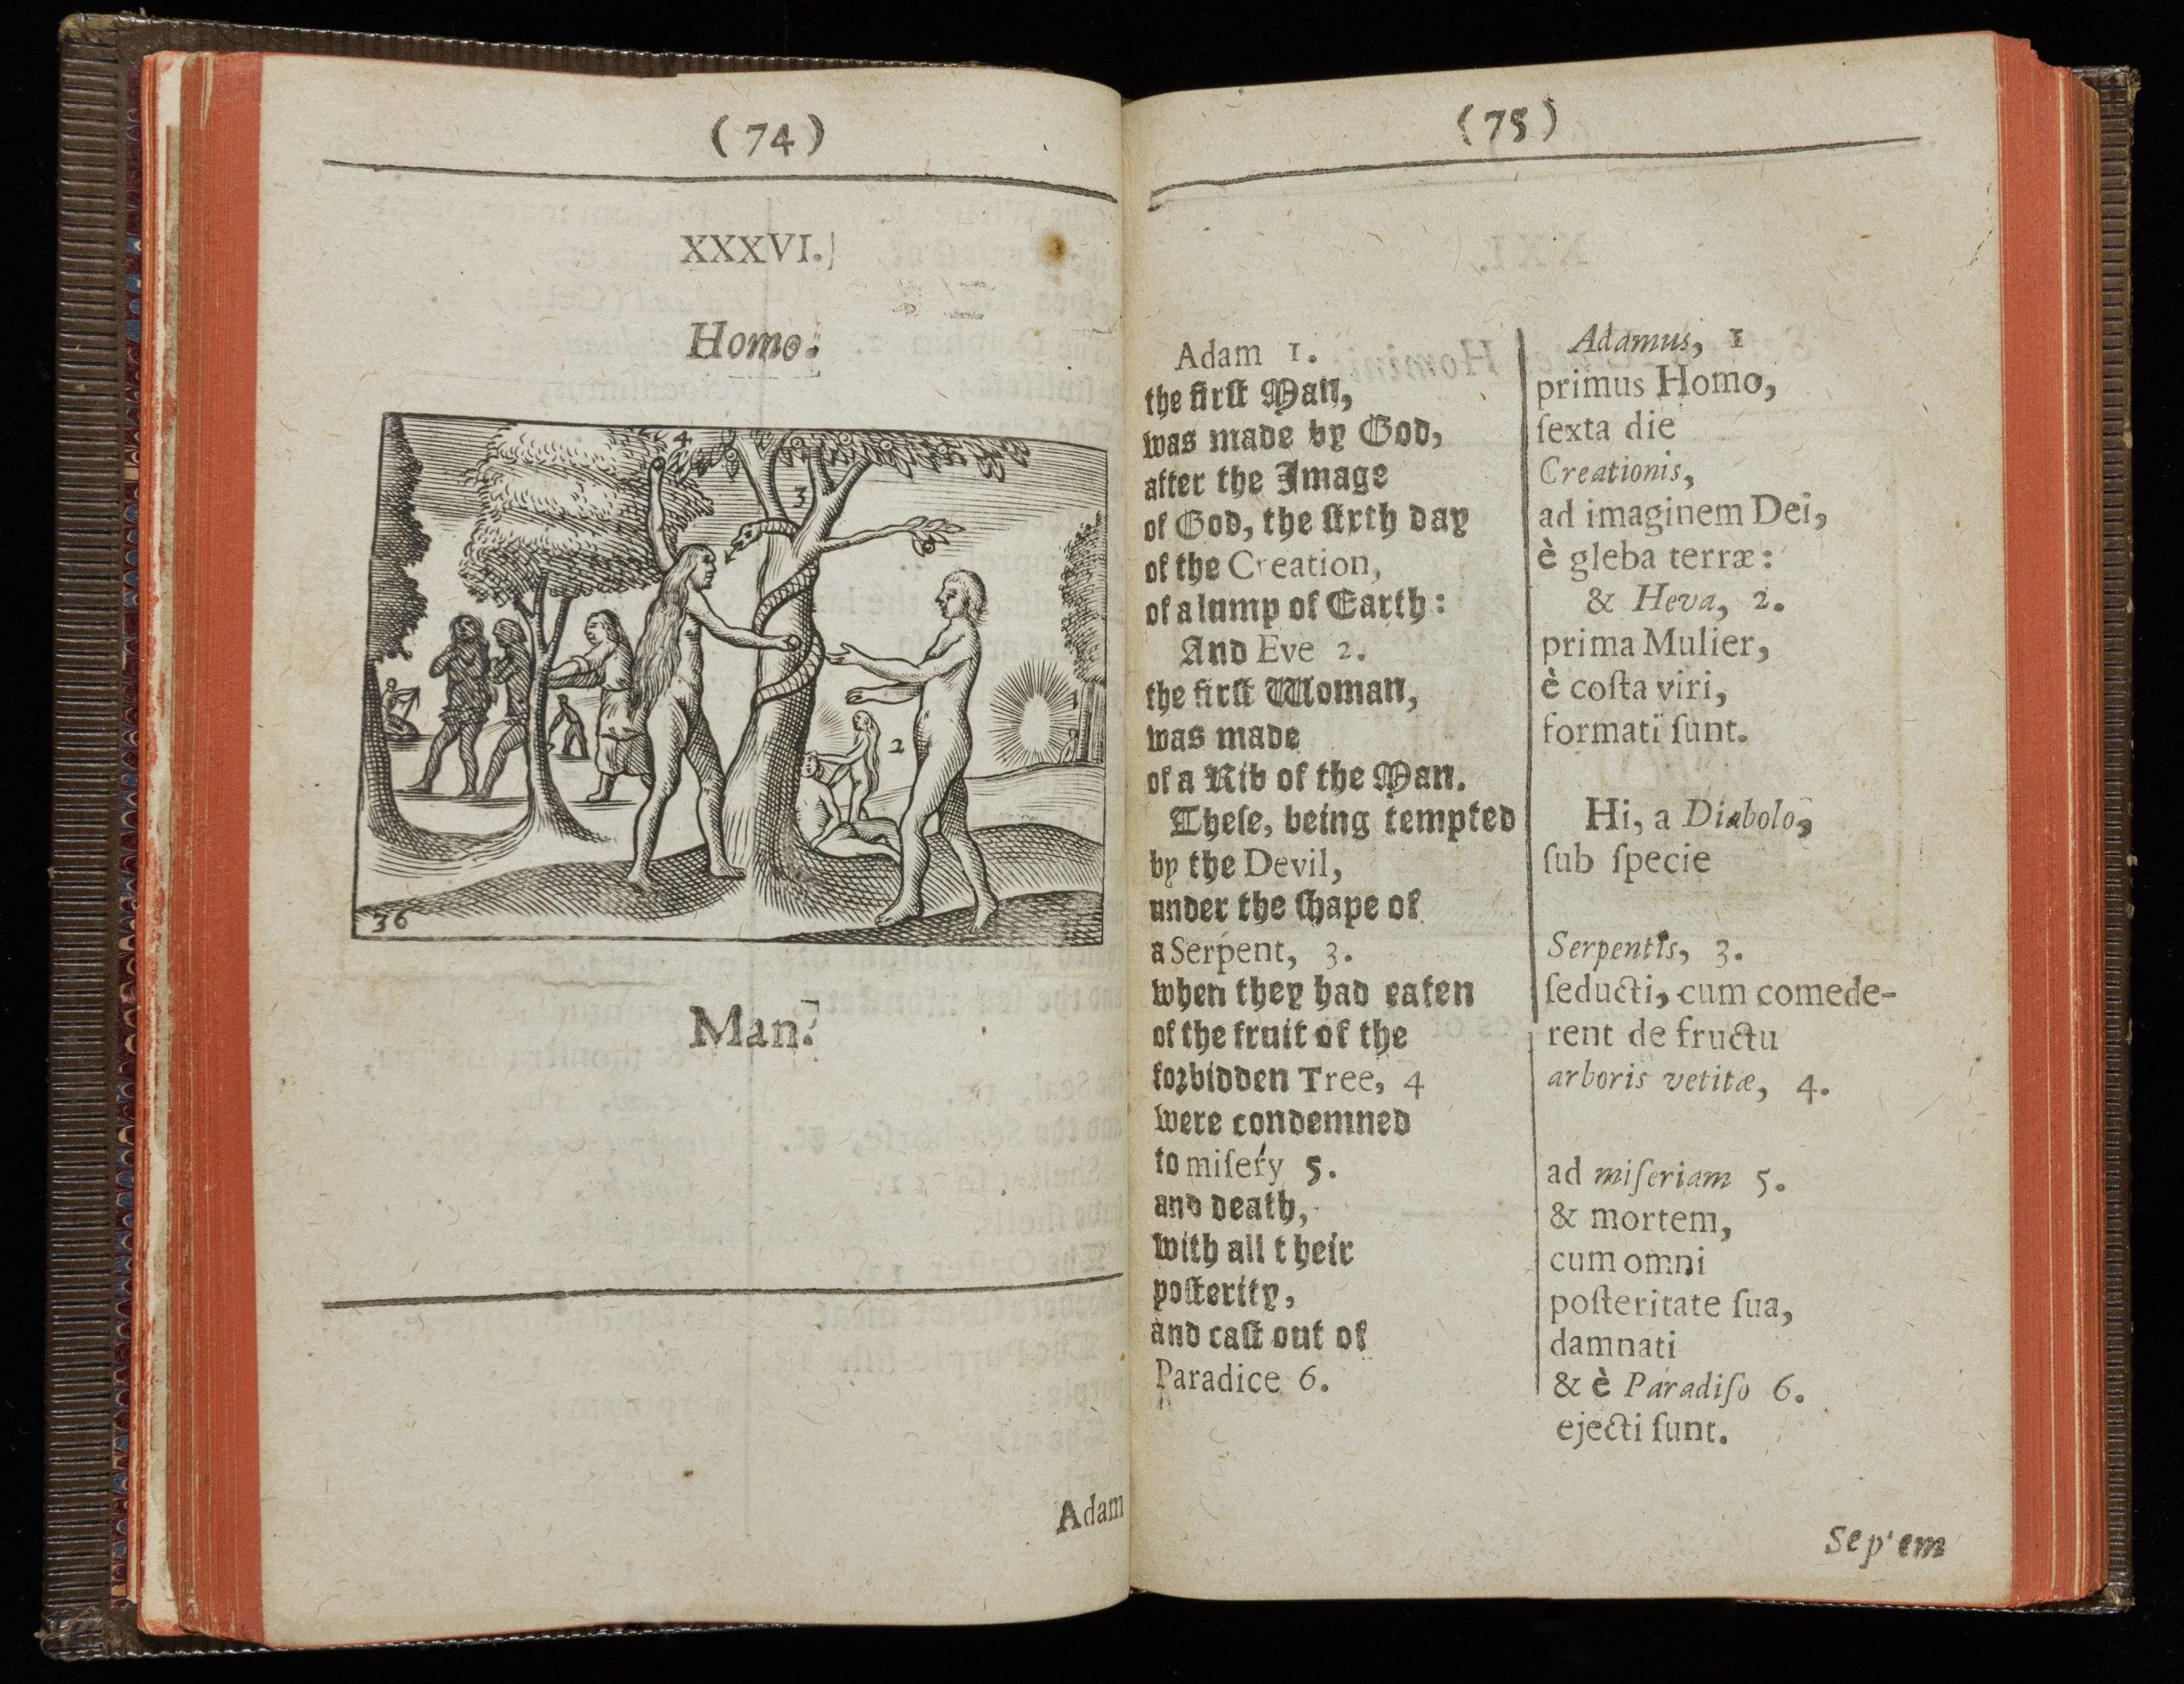 Two-page spread of an early printed book. Text is in English and Latin in black in an 17th-century font (some "s"s written as "f"s). On the right-hand page is a woodcut print image of Adam and Eve in various parts of their story. On the right God creates Adam (numbered 1), then Eve (2). In the center, the serpant climbs the tree (3) and Eve takes the apple (4). On the left, God codemns Adam and Eve (5) and casts them out of the Garden (6). Above the image is "Homo," below it "Man." The left page has text in Latin and English. In English it reads, "Adam 1./the firft Man,/was made by God,/after the Image/of God, the firft day/of the Creation/of a lump of Earth:/And Eve 2./the firft Woman,/was made/of a Rib of the Man./Thefe, being tempted/by the Devil,/under the fhape of/a Serpent, 3./when they had eaten/of the fruit of the/forbidden Tree, 4./were condemned/to mifery 5./and death,/with all their/pofterity,/and caft out of/Paradice 6."